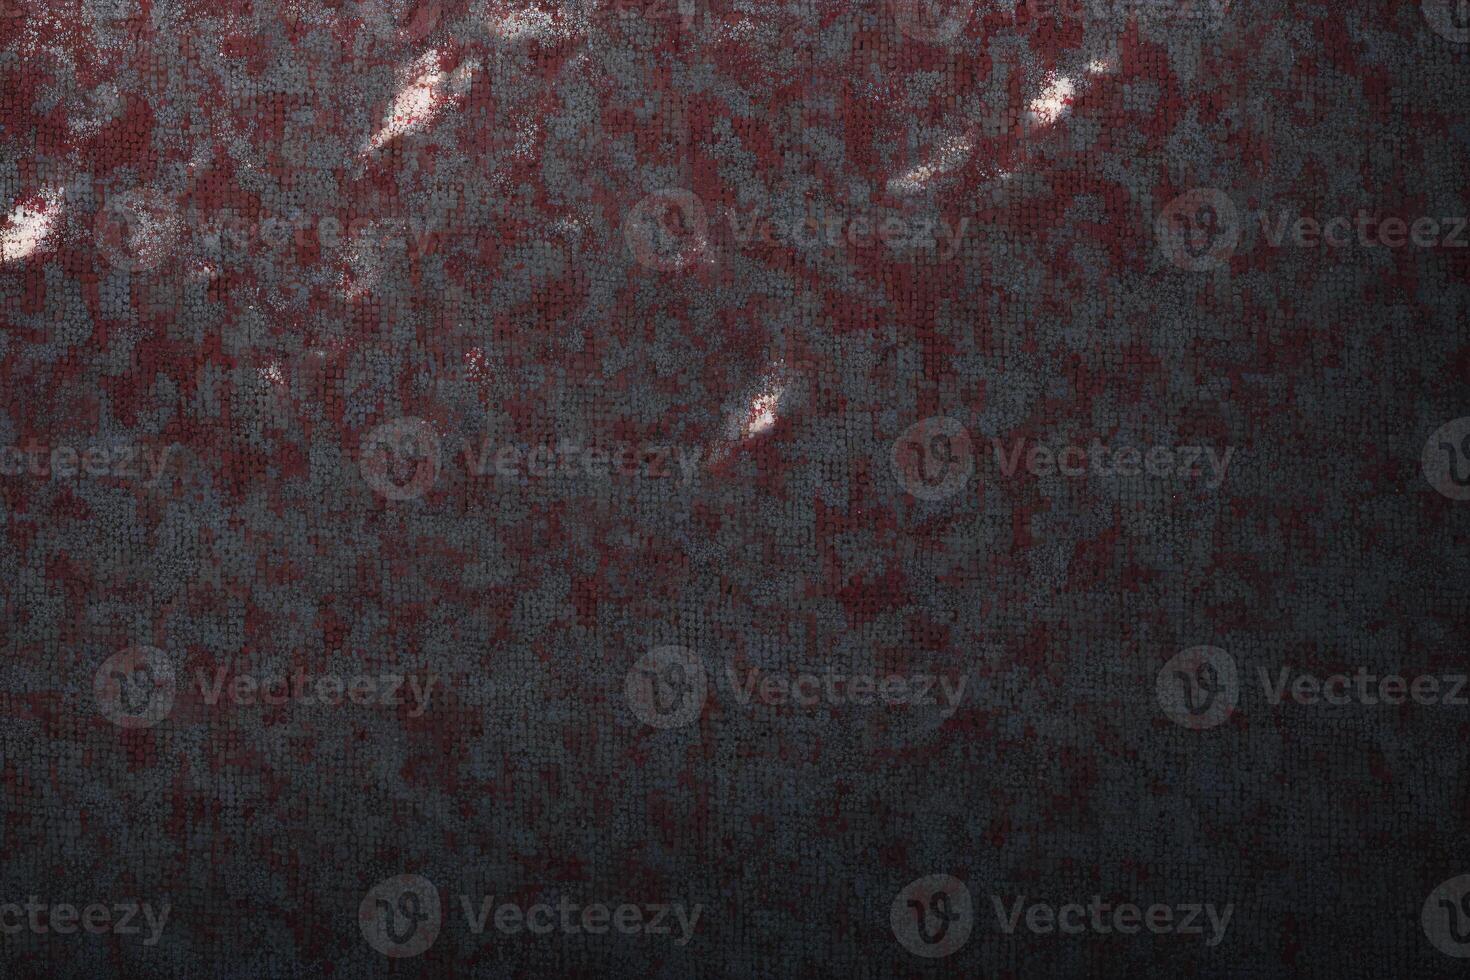 Red marble texture background pattern. red stone surface. abstract natural marble red and gold. photo